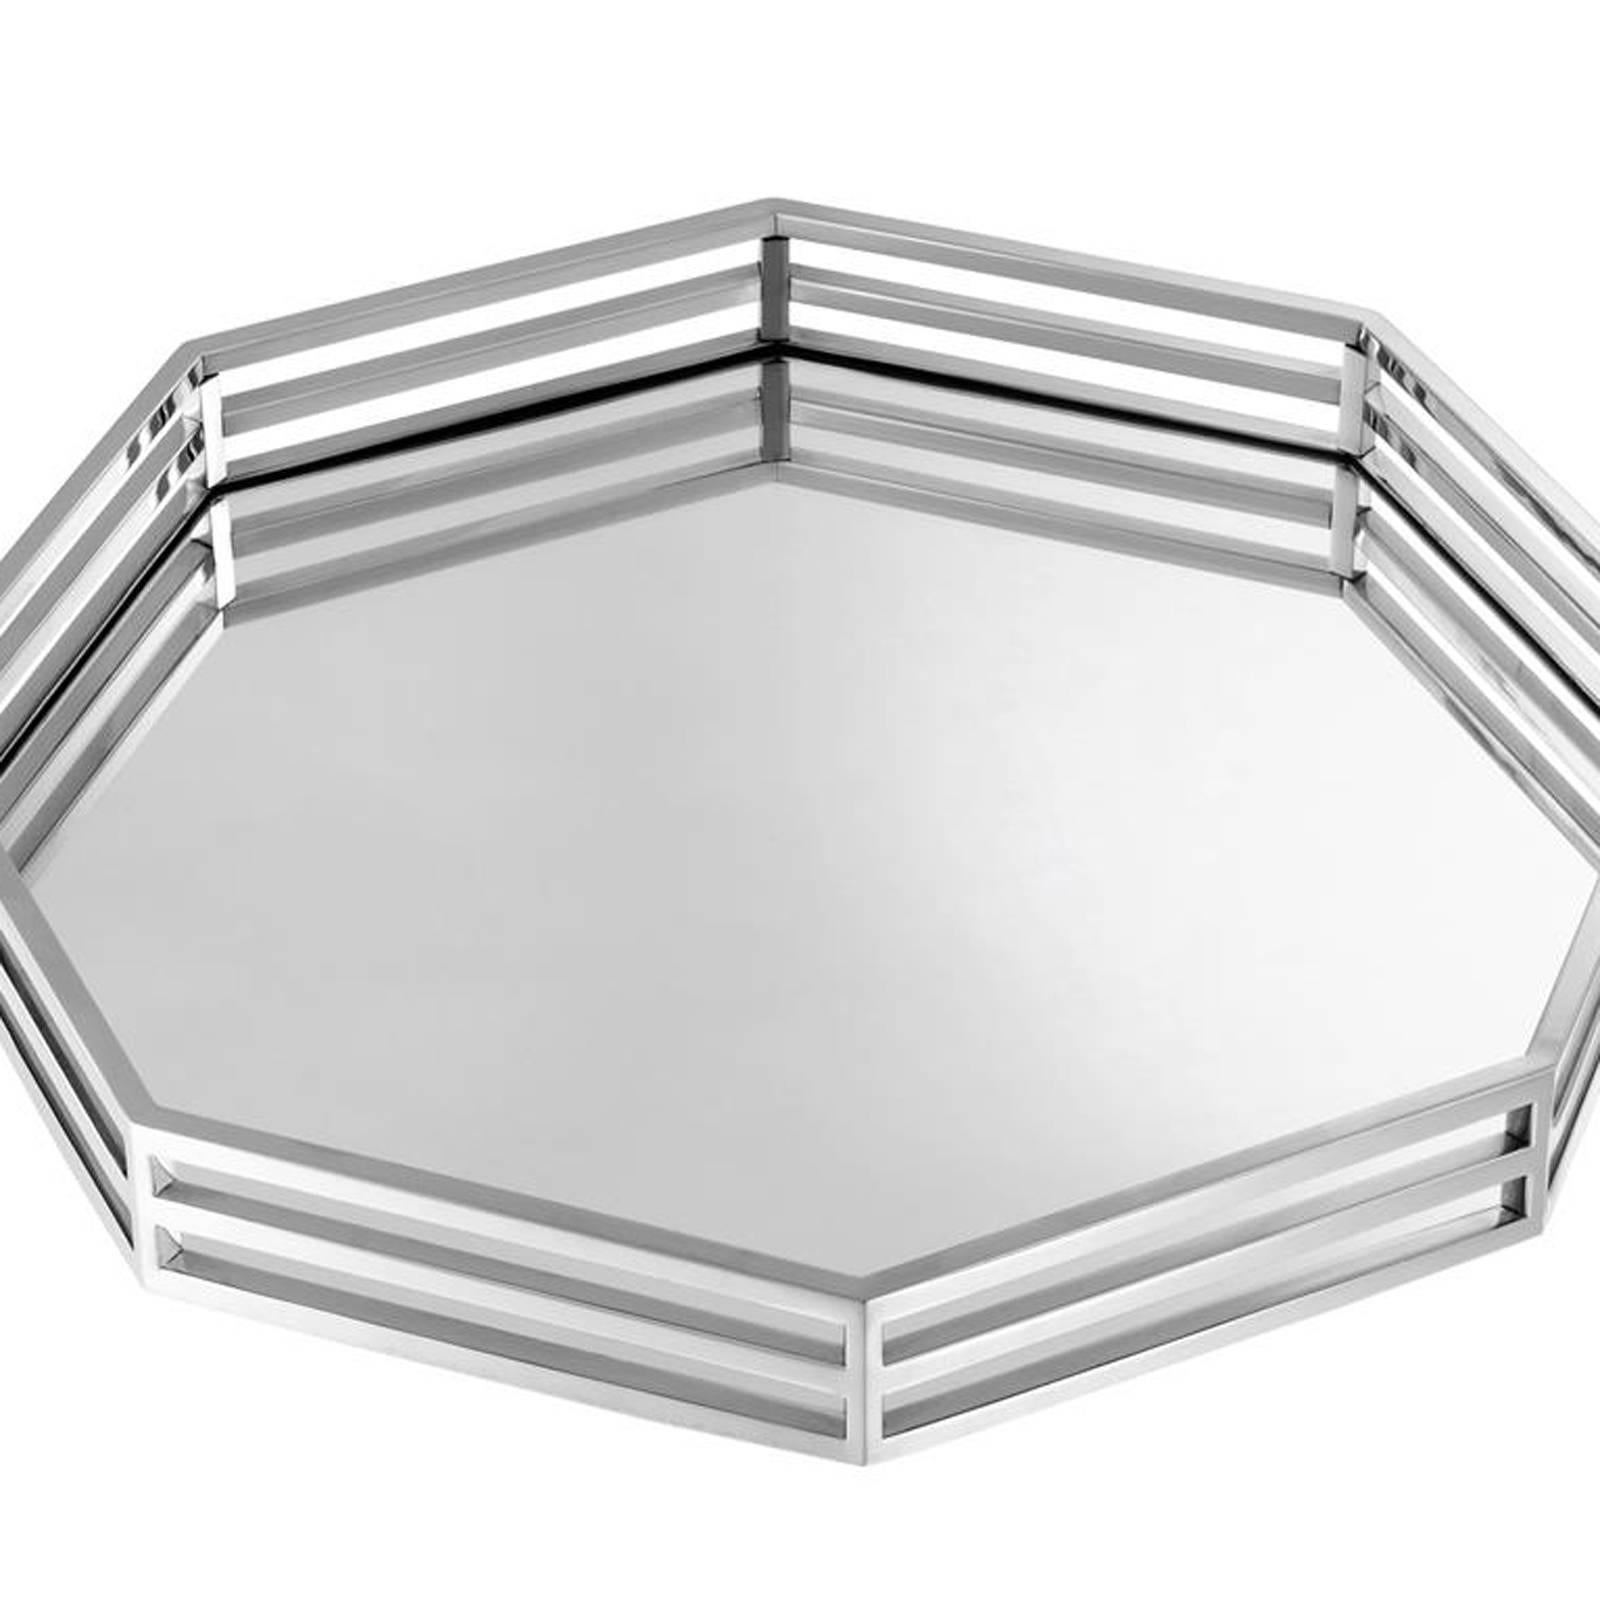 Tray Octogon in polished nickel finish
and mirror glass. Elegant serving piece.
